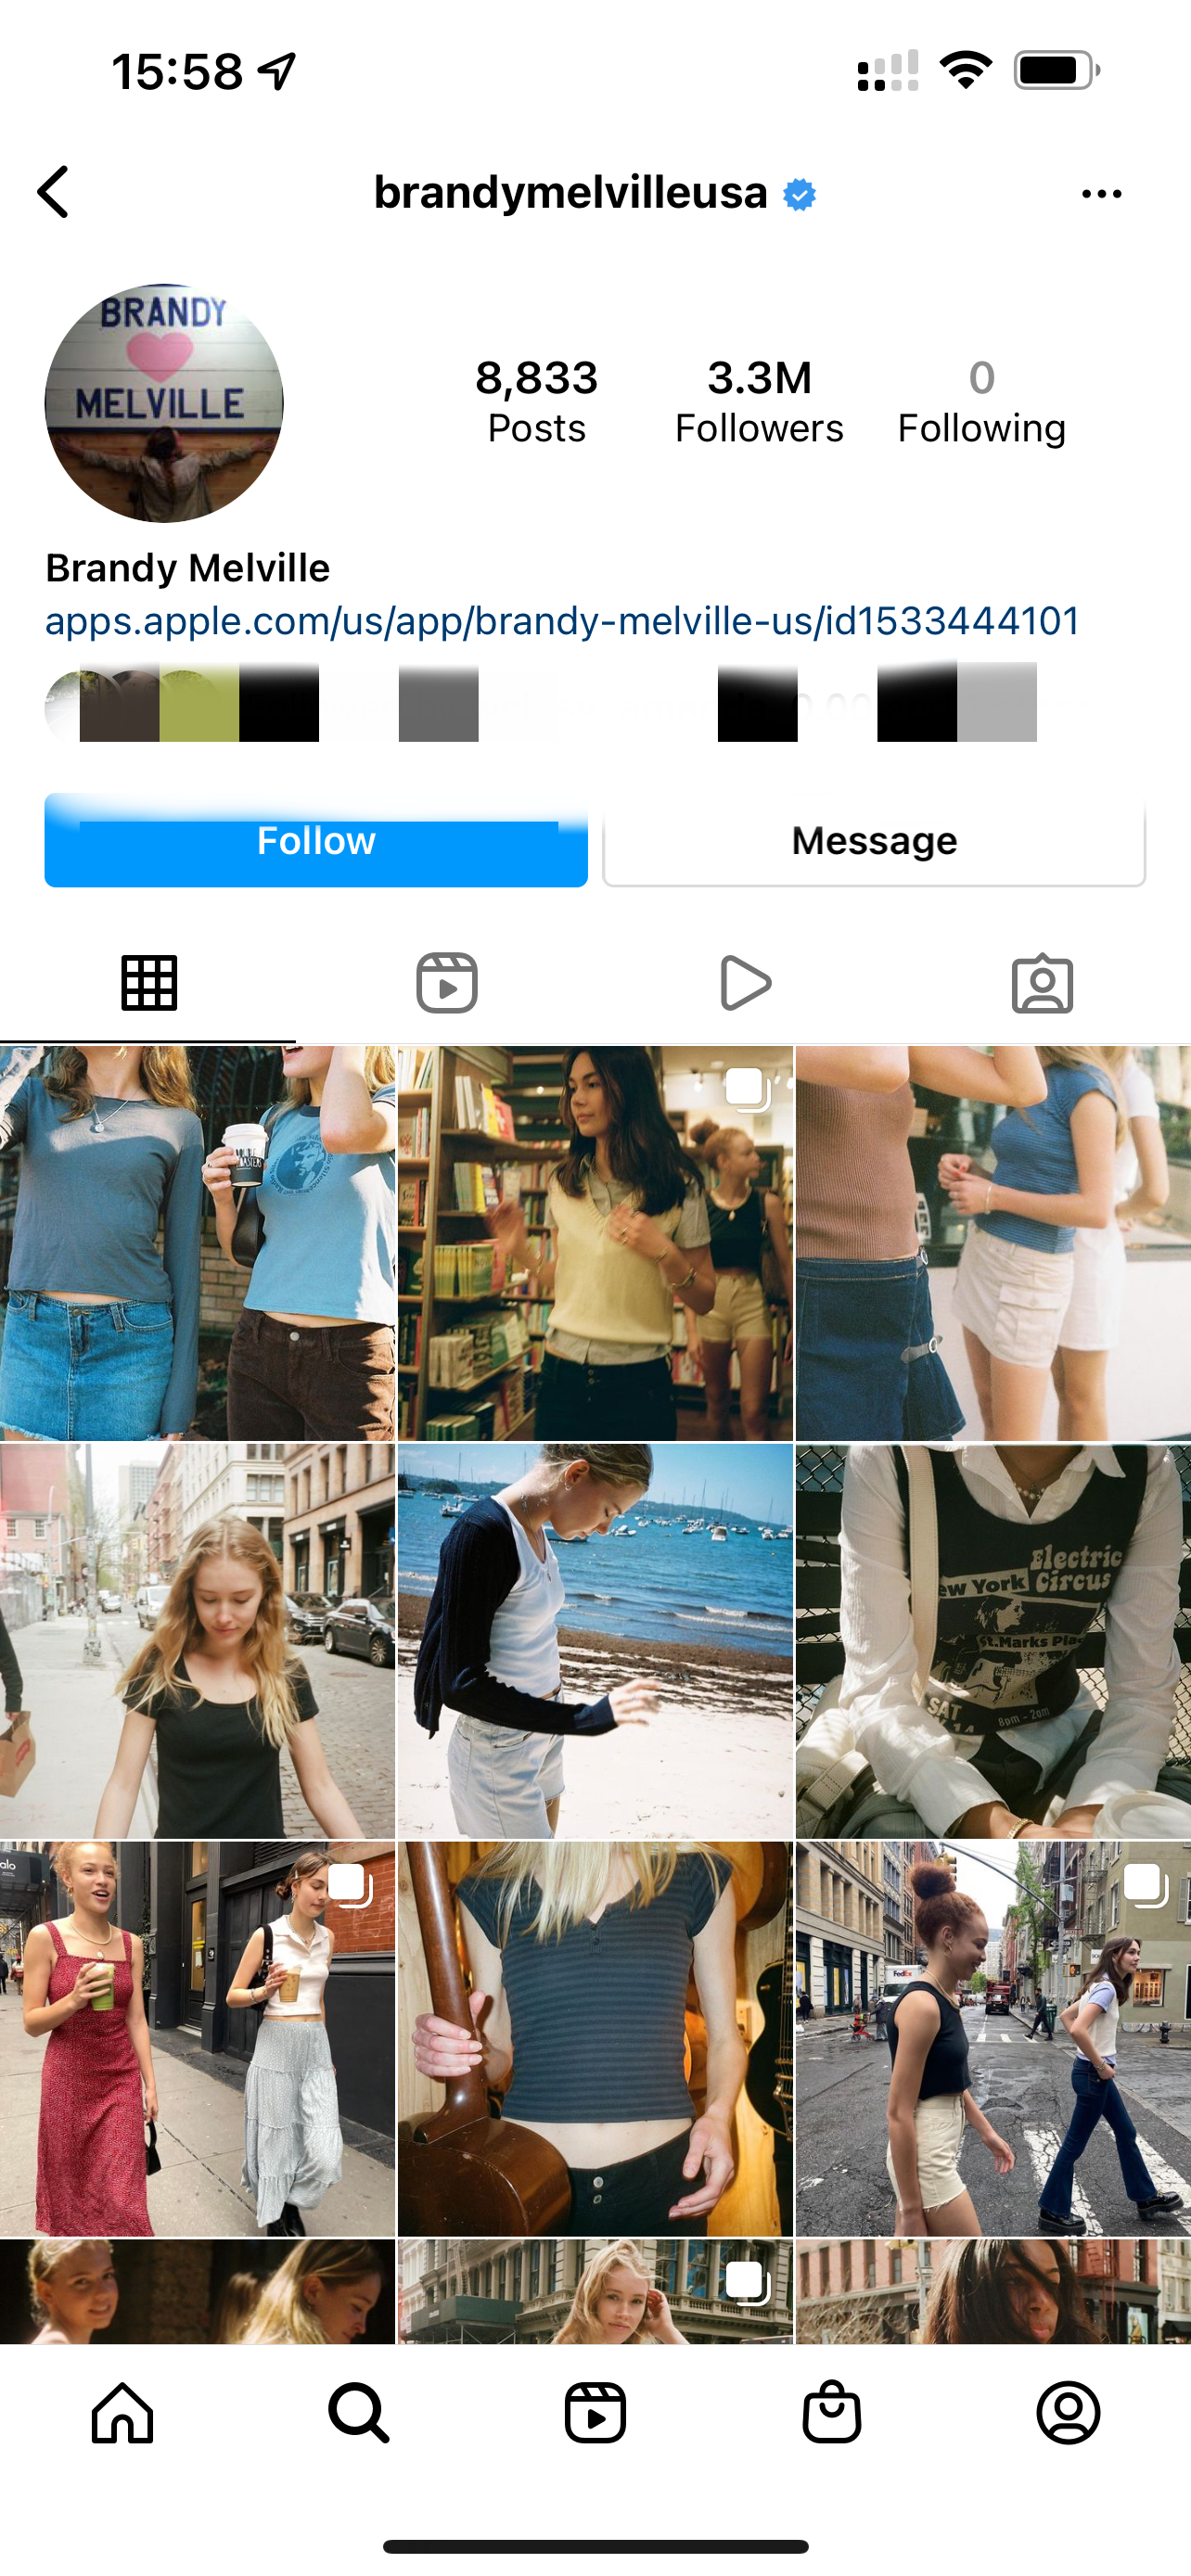 Brandy Melville and the rise of the Instabrand